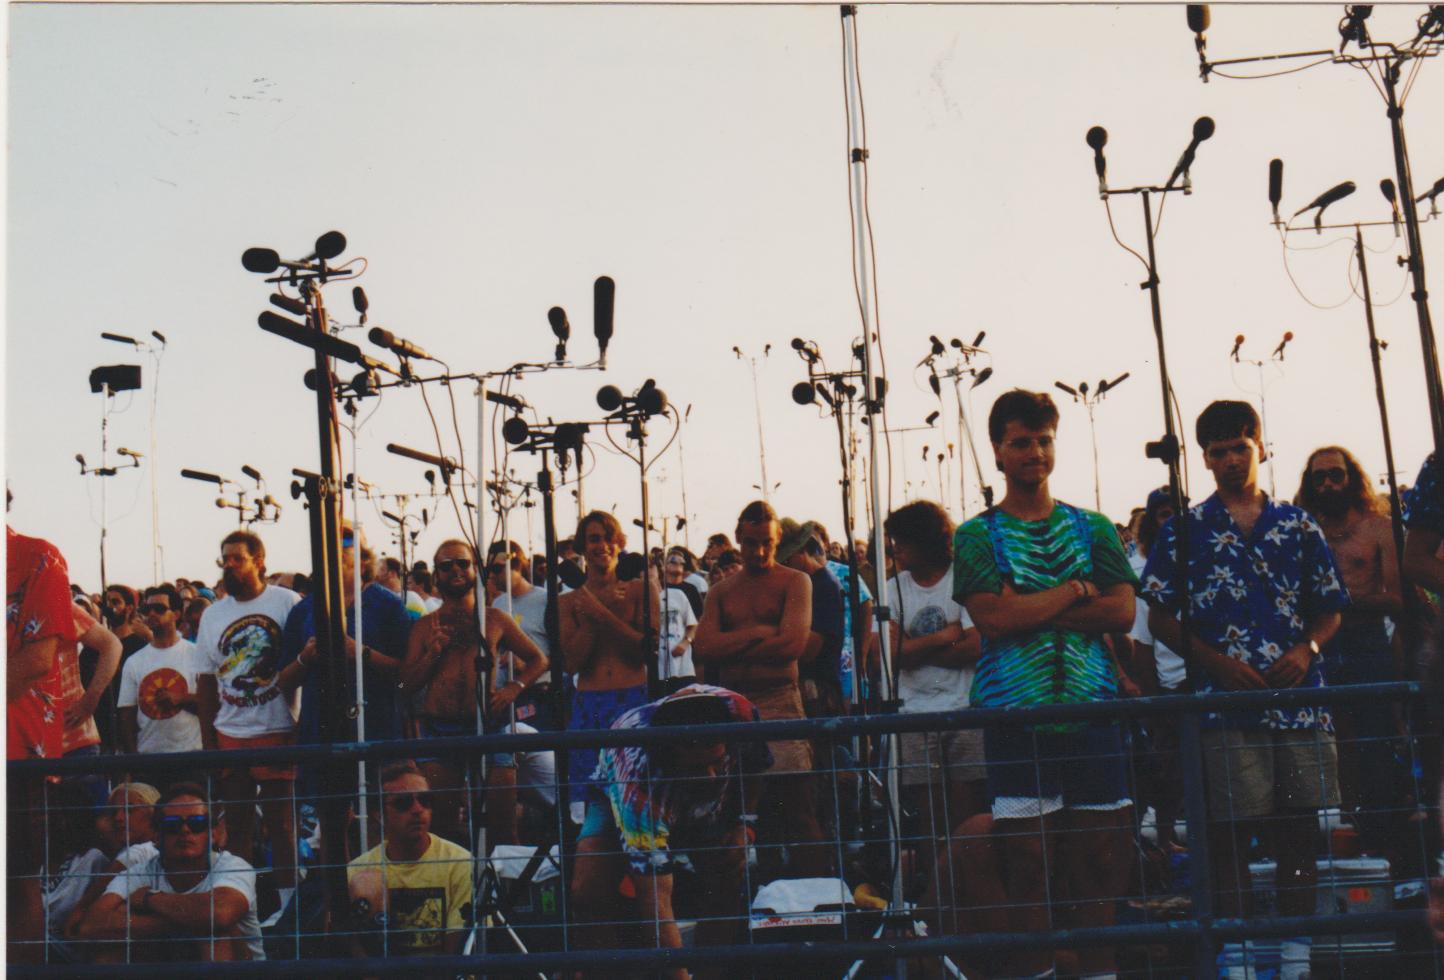 Clay, shirtless in the center, taping the Grateful Dead in June 1991.